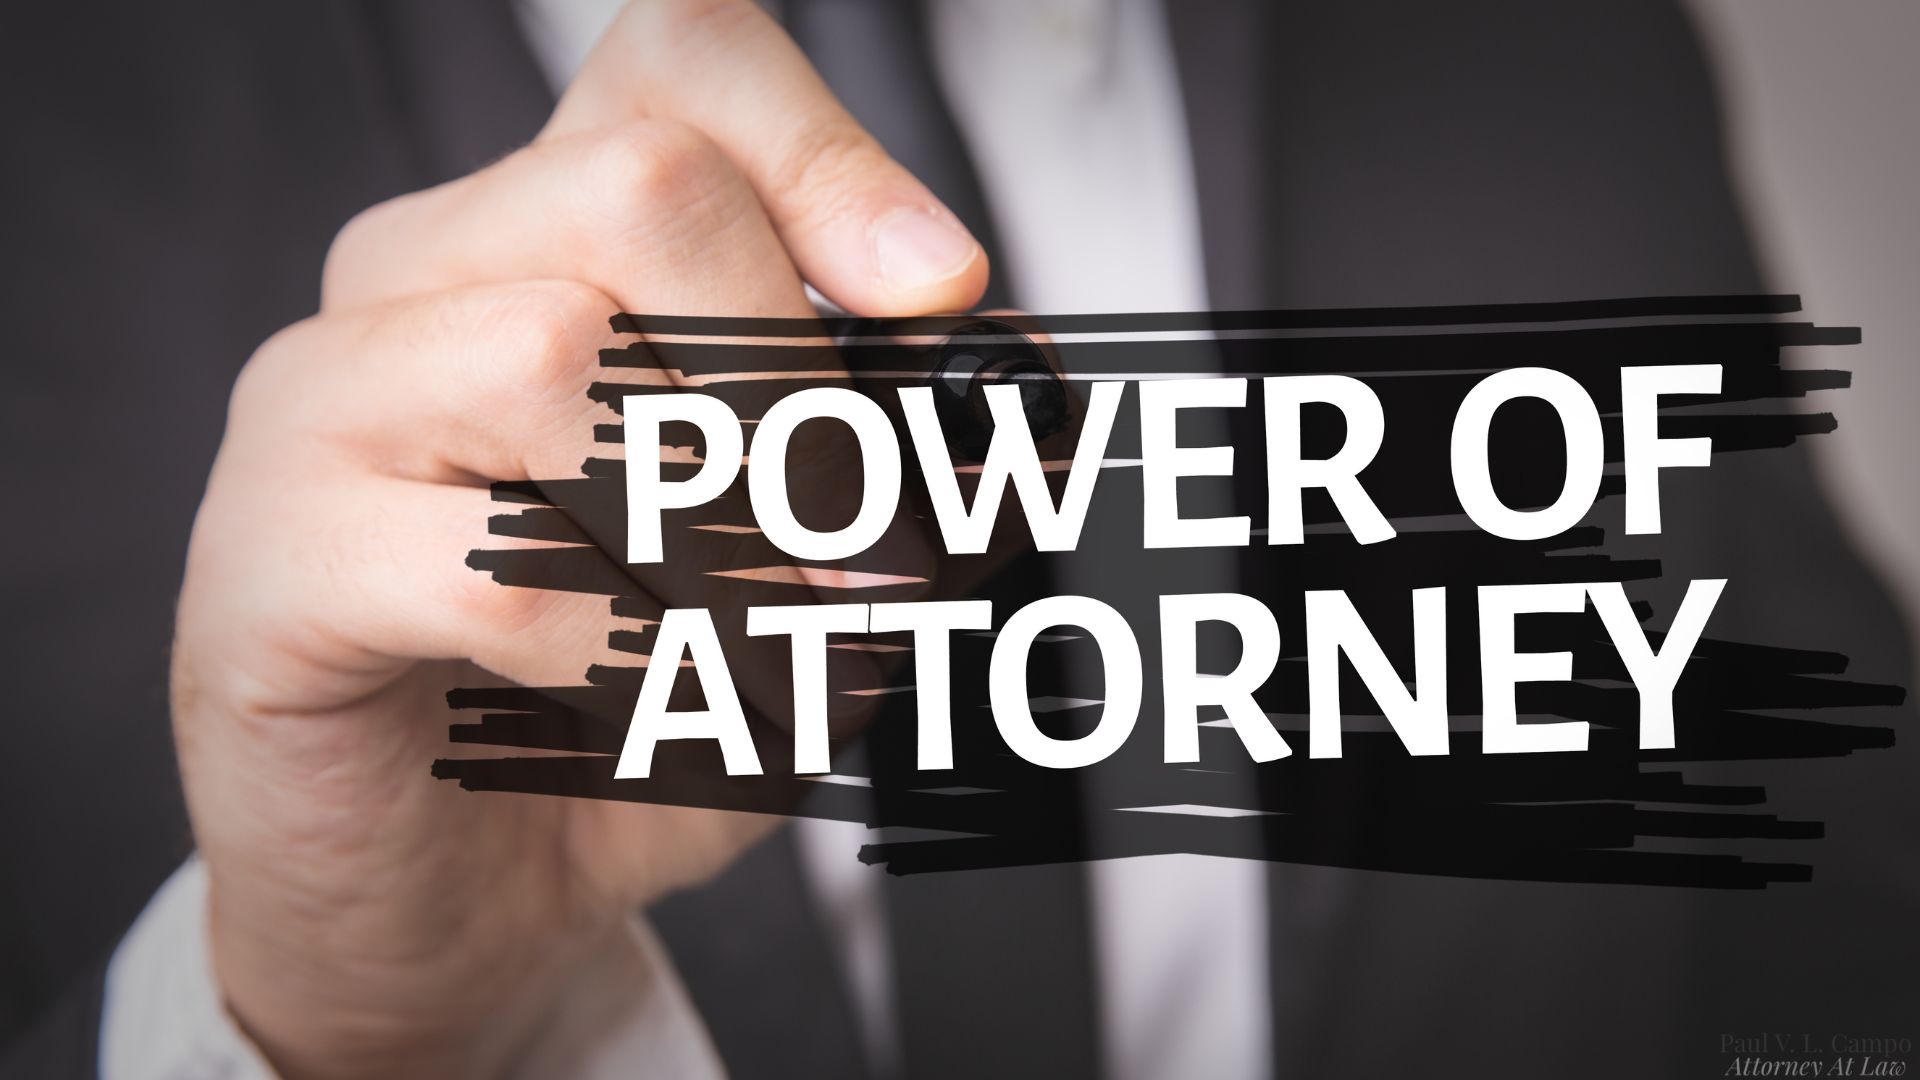 Carlsbad Durable Powers of Attorney